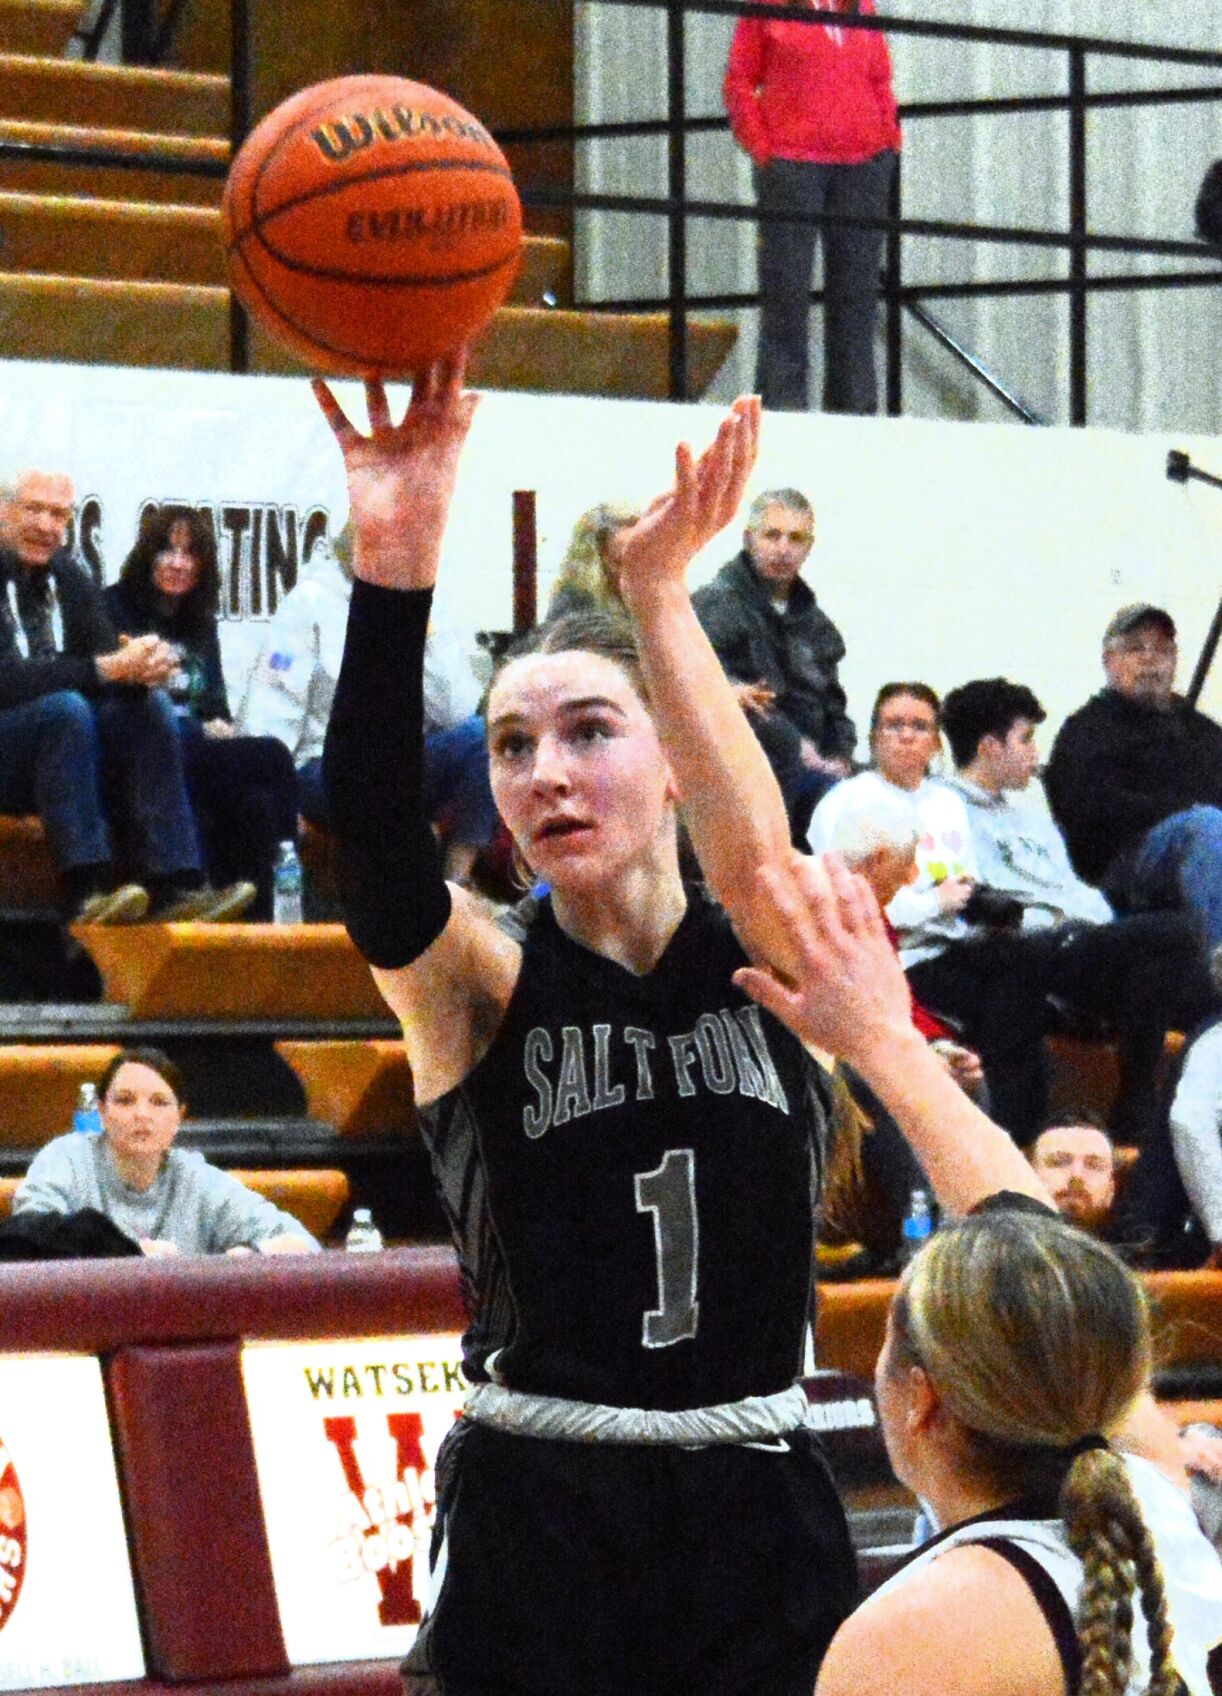 Salt Fork Girls Basketball Team Aims for Sectional Championship Victory Against Altamont Indians